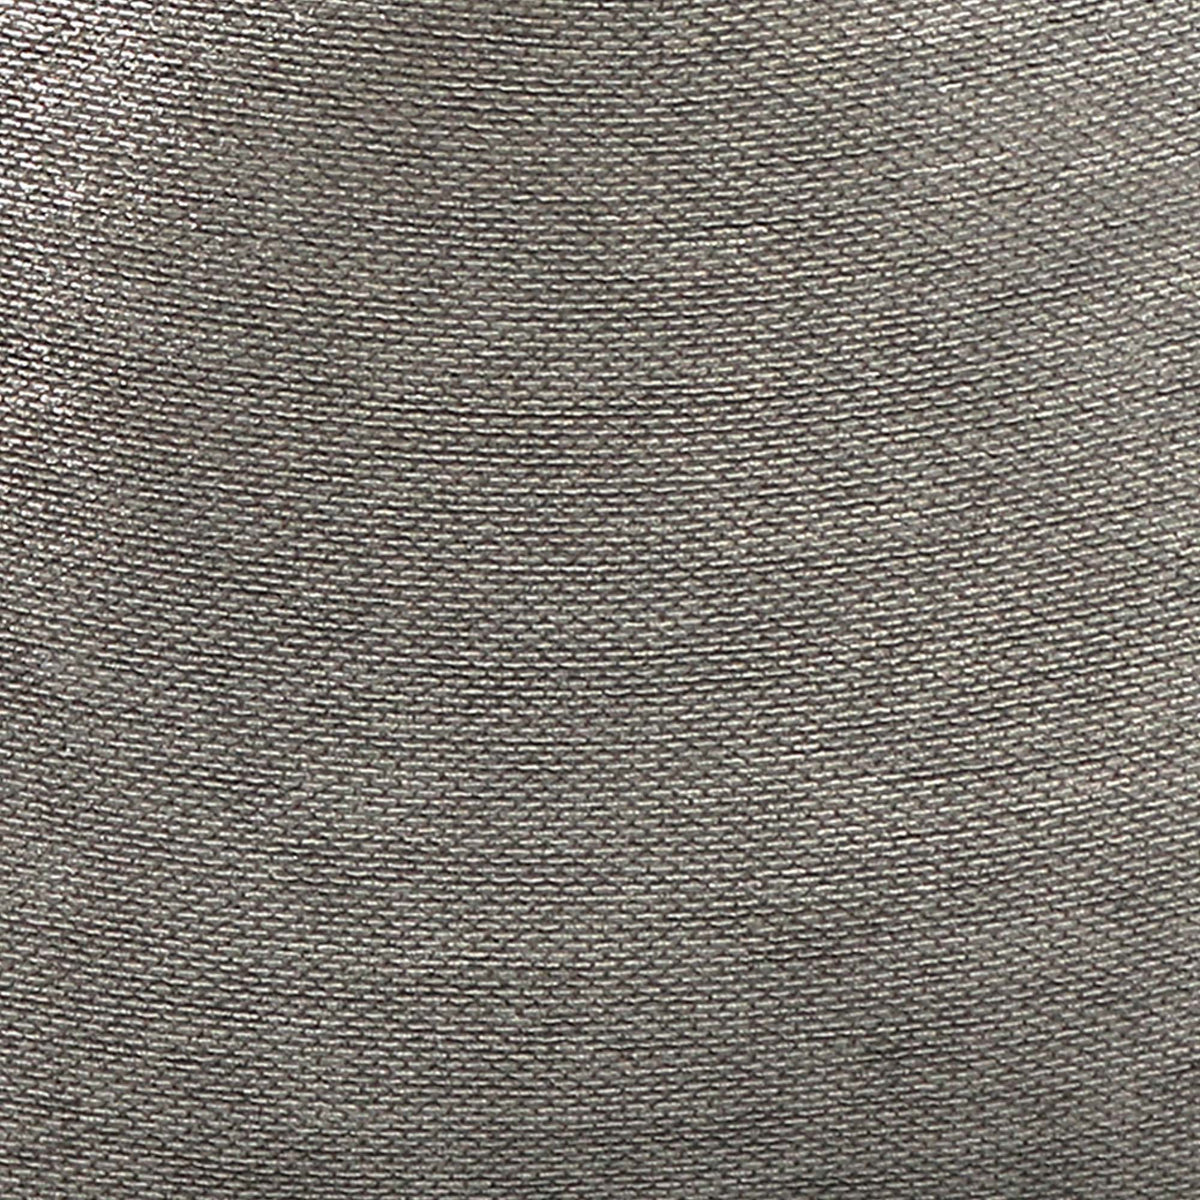 Glimmer Mineral / 4x4 inch Fabric Swatch